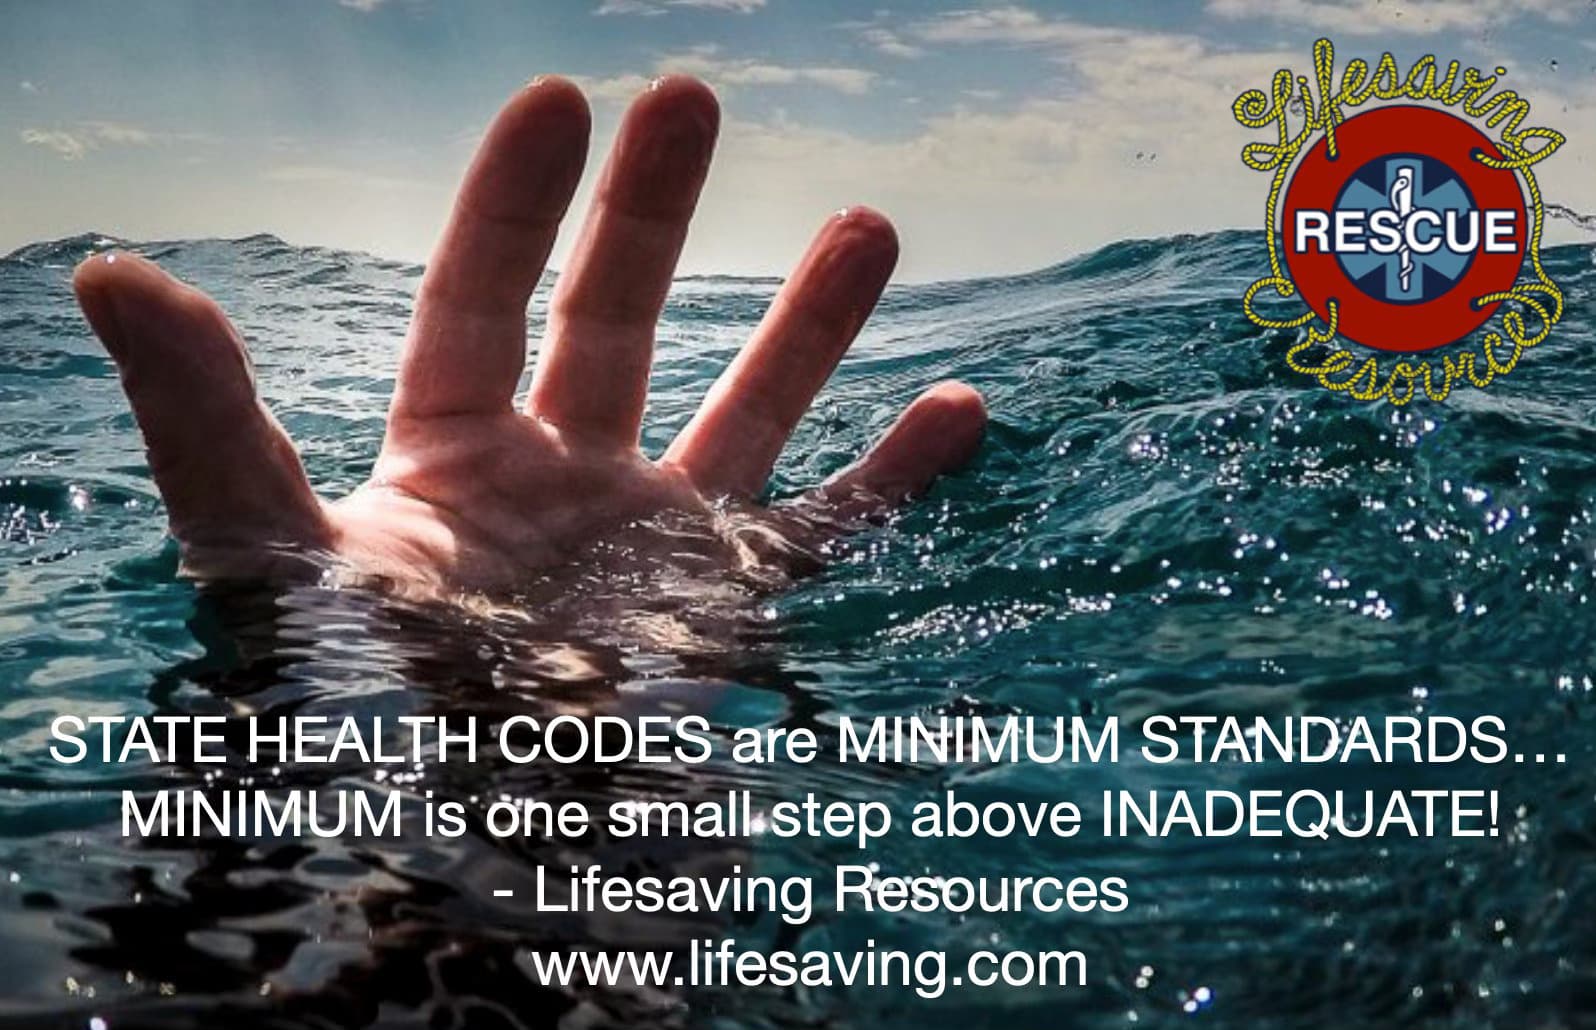 State Health Codes are Minimum Standards. Minimum is one small step above inadequate..